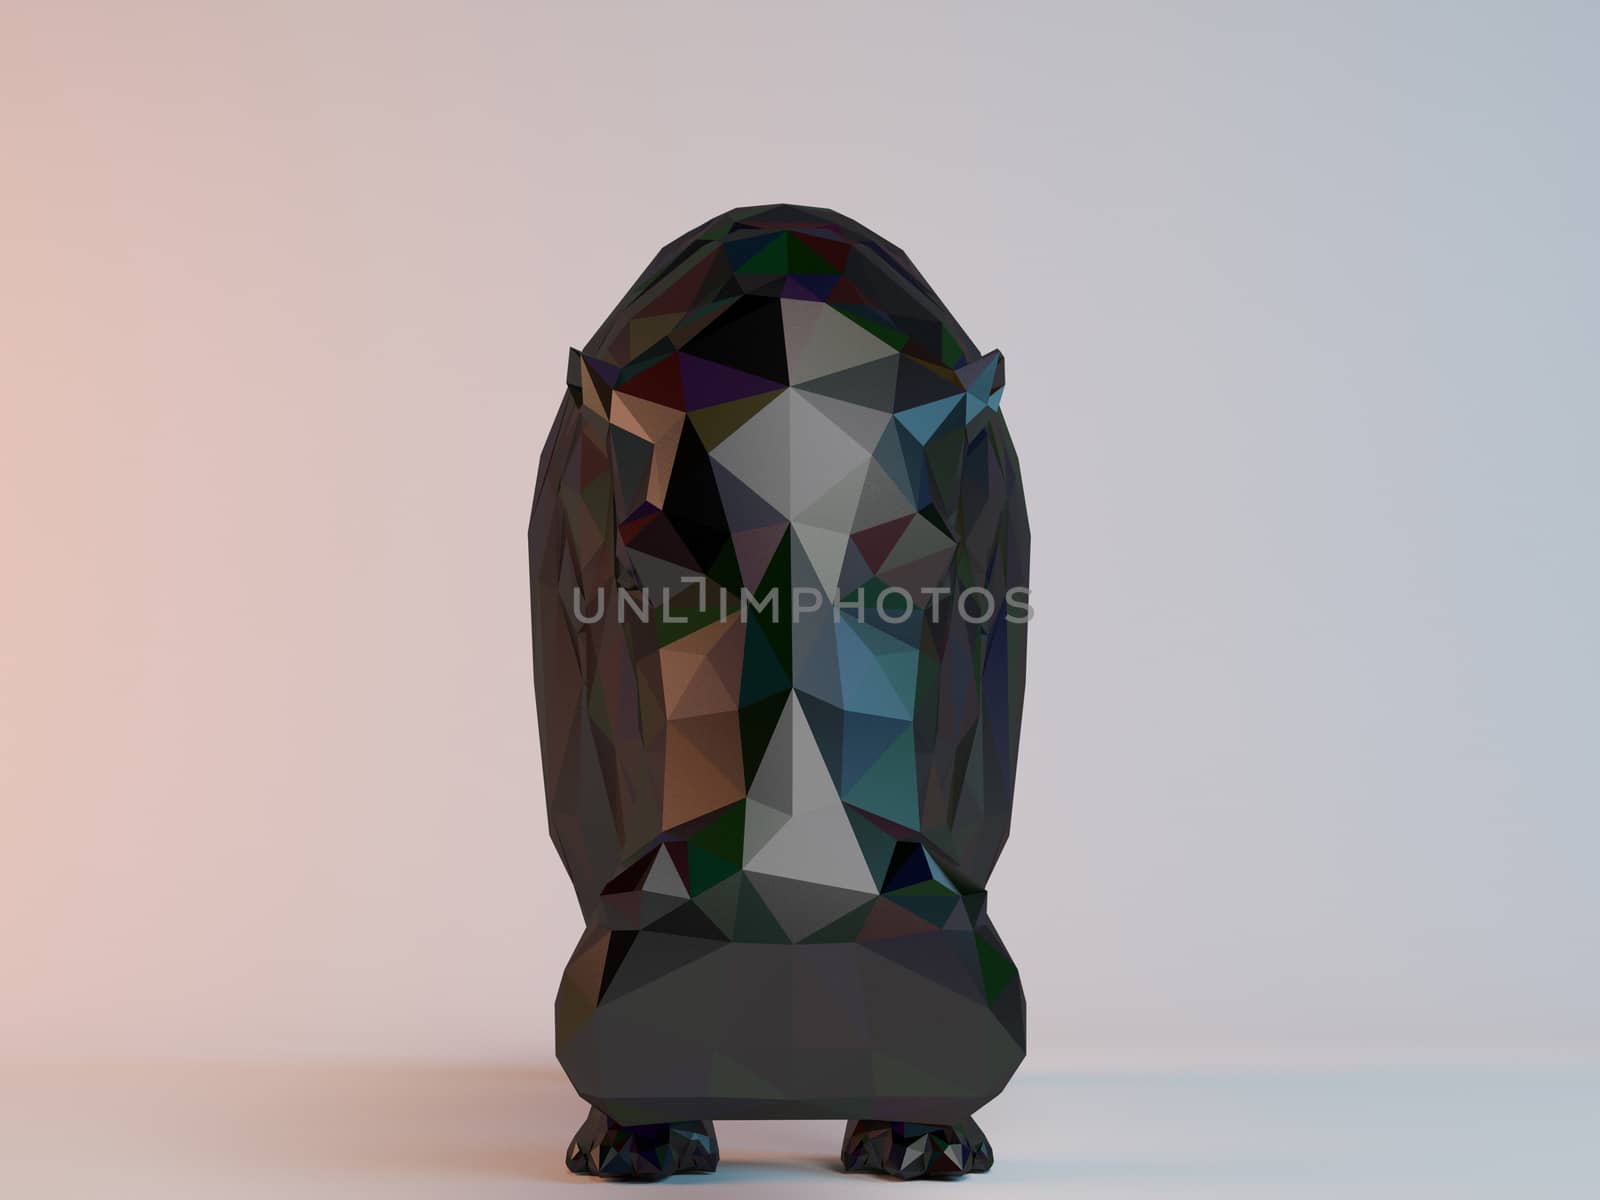 3D black low poly (Hippo) inside a white stage with high render quality to be used as a logo, medal, symbol, shape, emblem, icon, children story, or any other use.